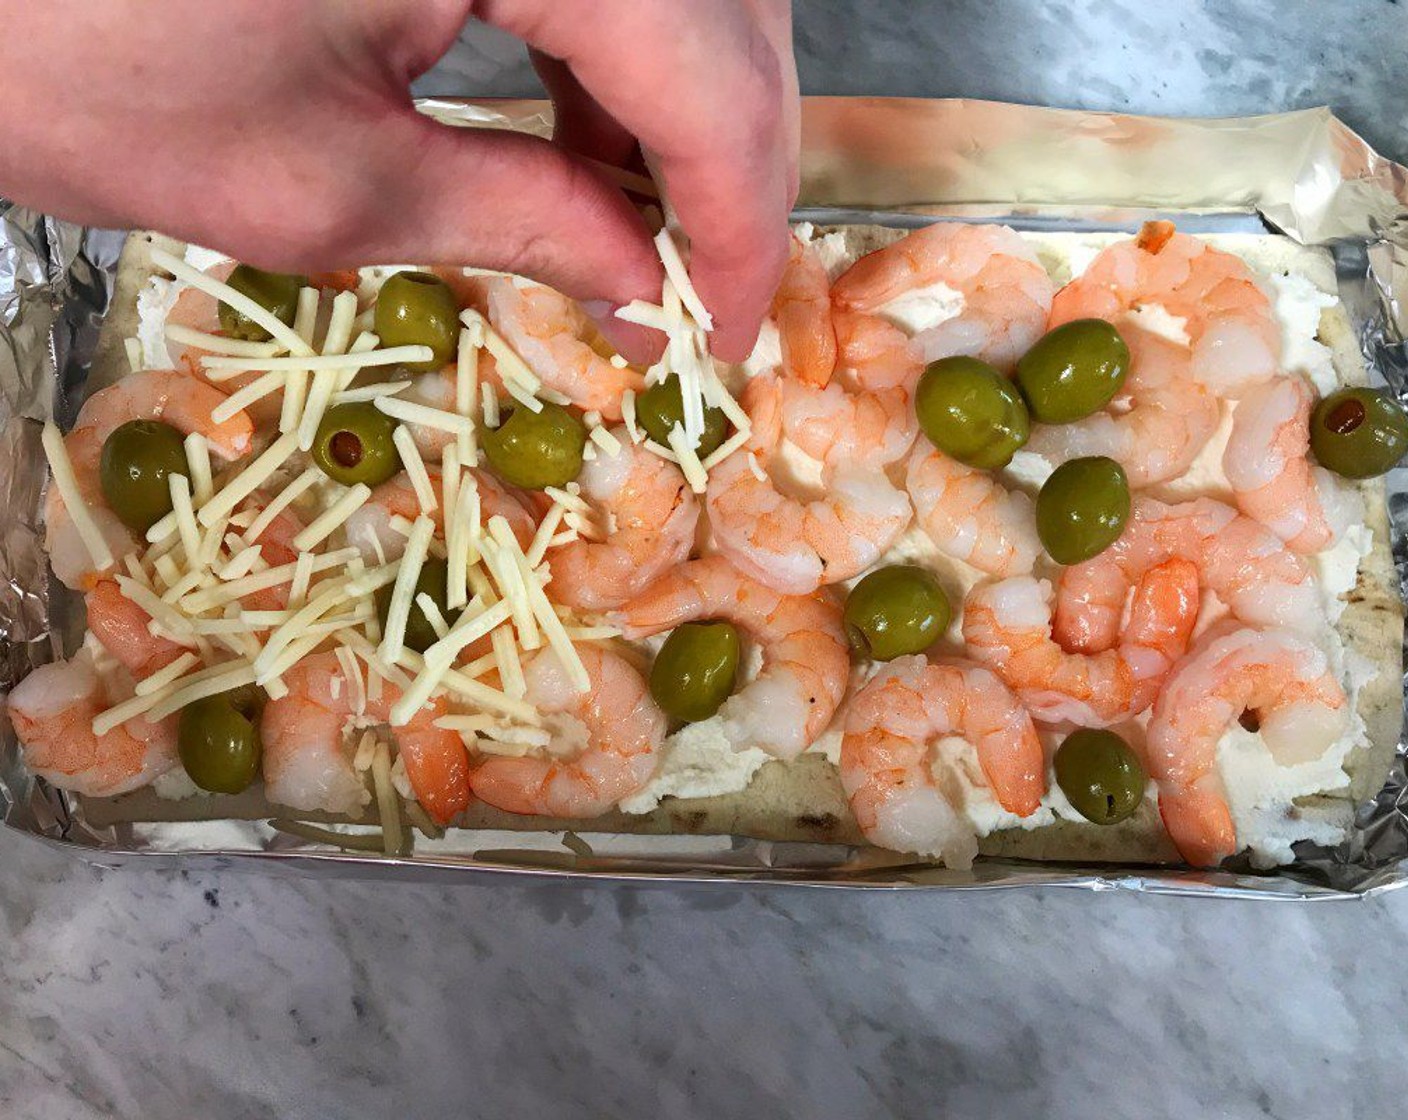 step 7 Top next with the shrimp and Olives (1/3 cup). Sprinkle with the Shredded Sharp Cheddar Cheese (3/4 cup).